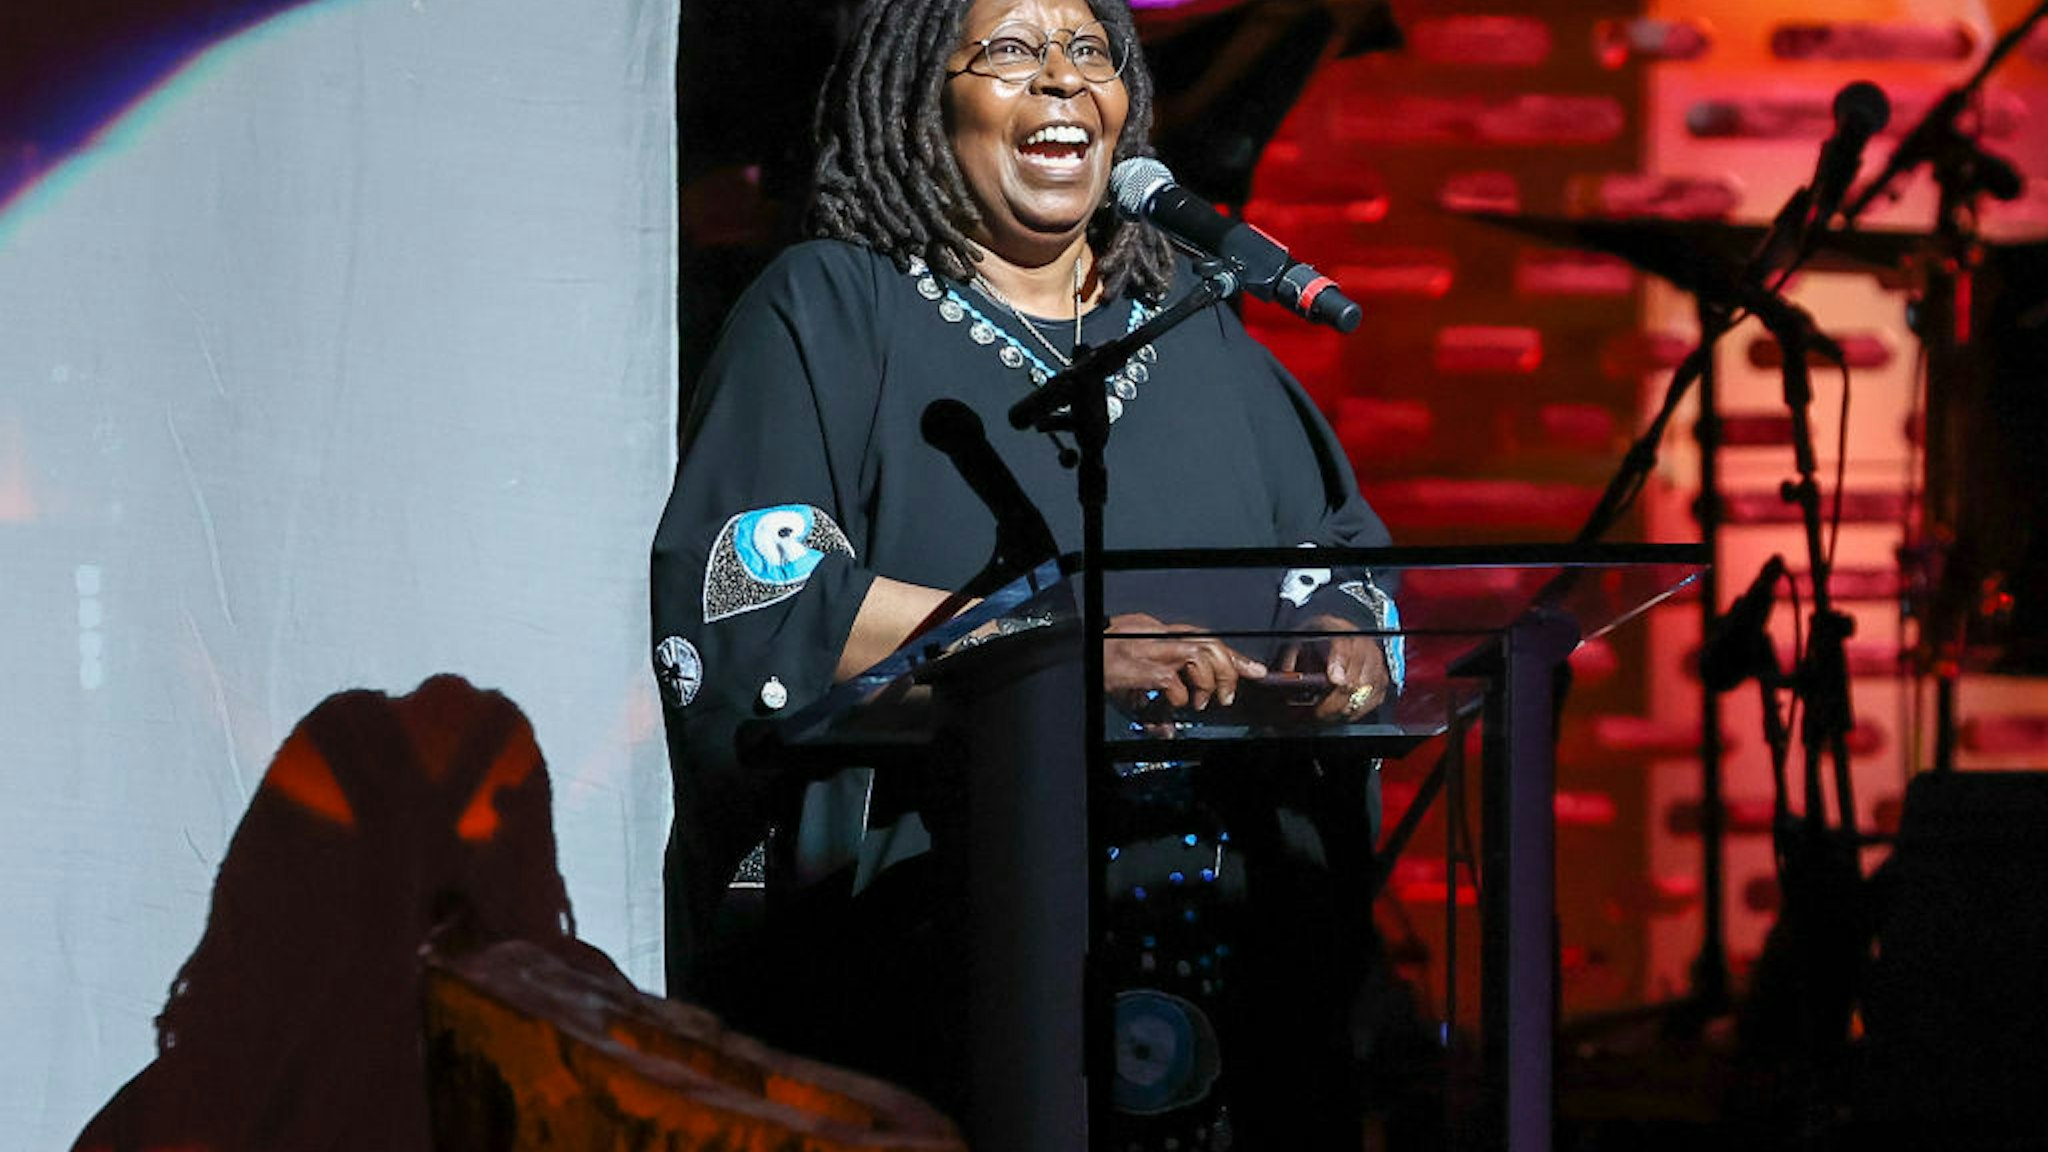 NEW YORK, NEW YORK - JUNE 13: Actress Whoopi Goldberg speaks at the 2022 Apollo Theater Spring Benefit at The Apollo Theater on June 13, 2022 in New York City. (Photo by Arturo Holmes/Getty Images)